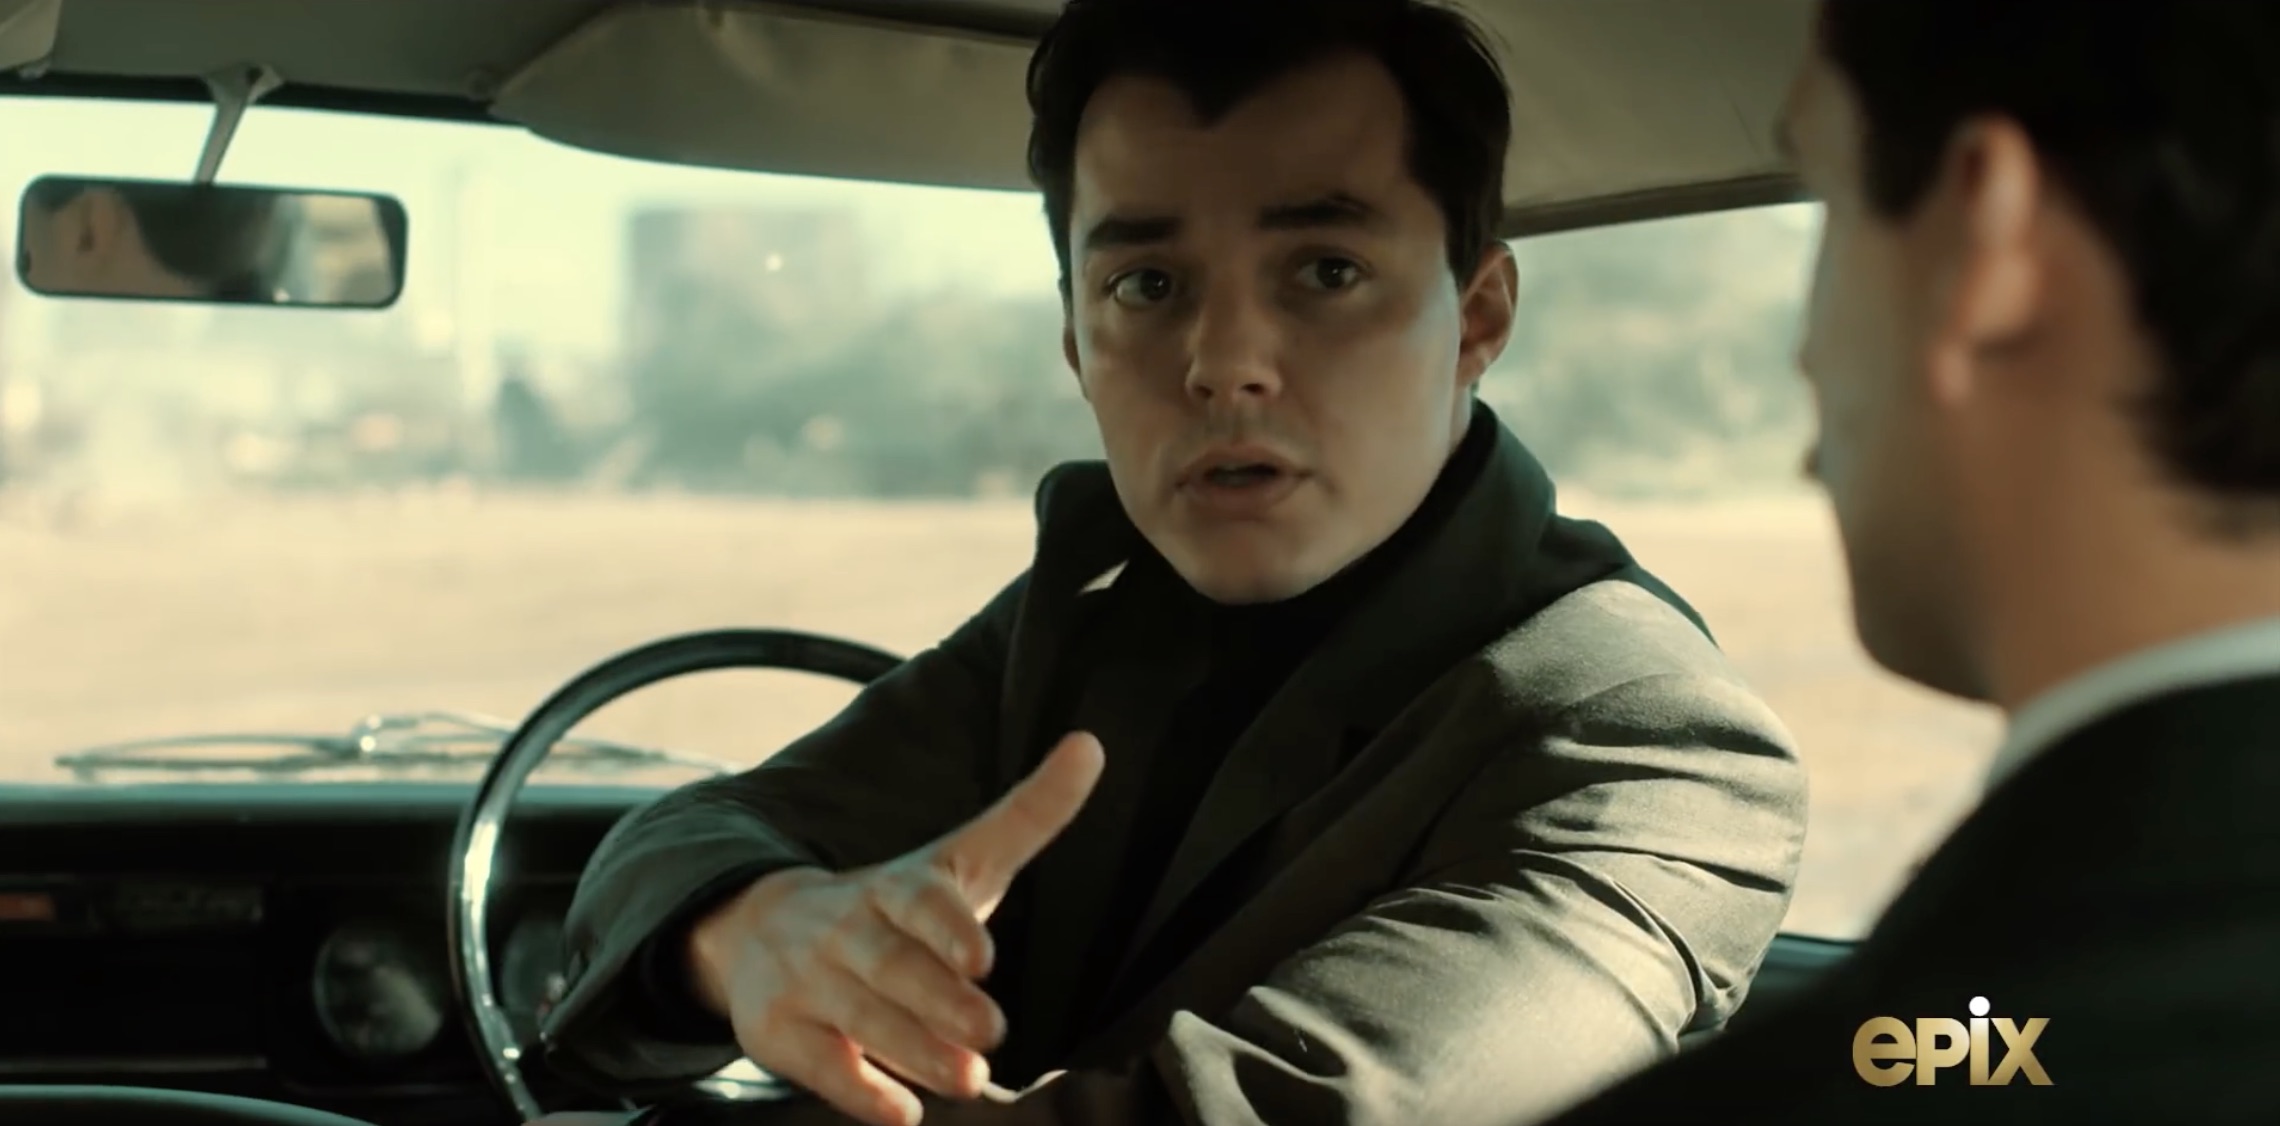 Wait, The Pennyworth Trailer Doesn’t Look S**t?